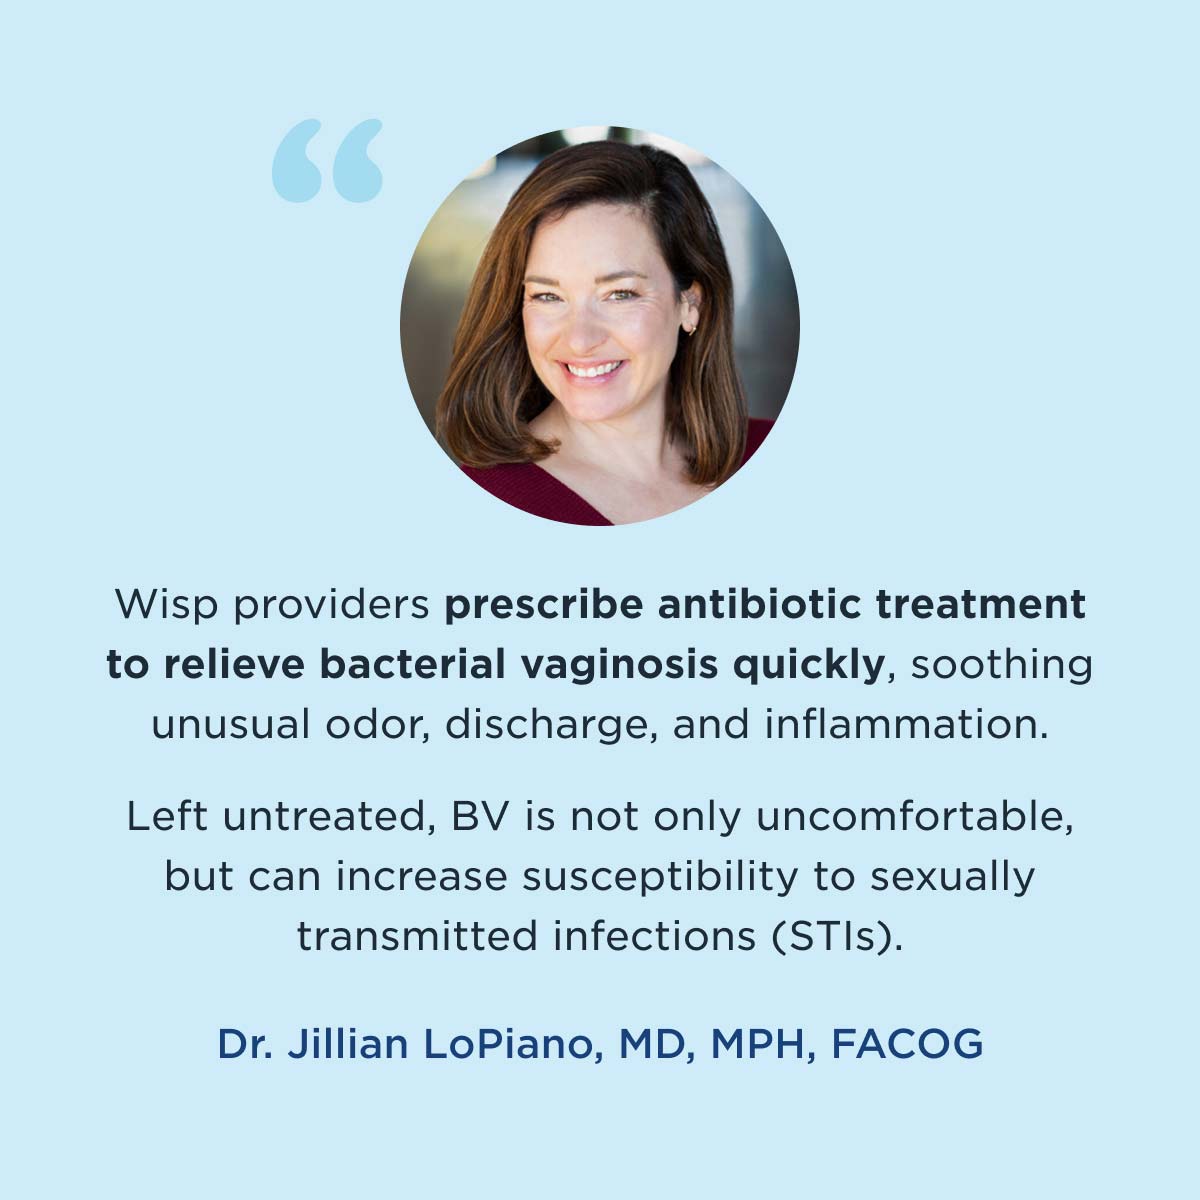 A medial provider quote about bacterial vaginosis treatment from Dr. Jillian Lopiano, MD